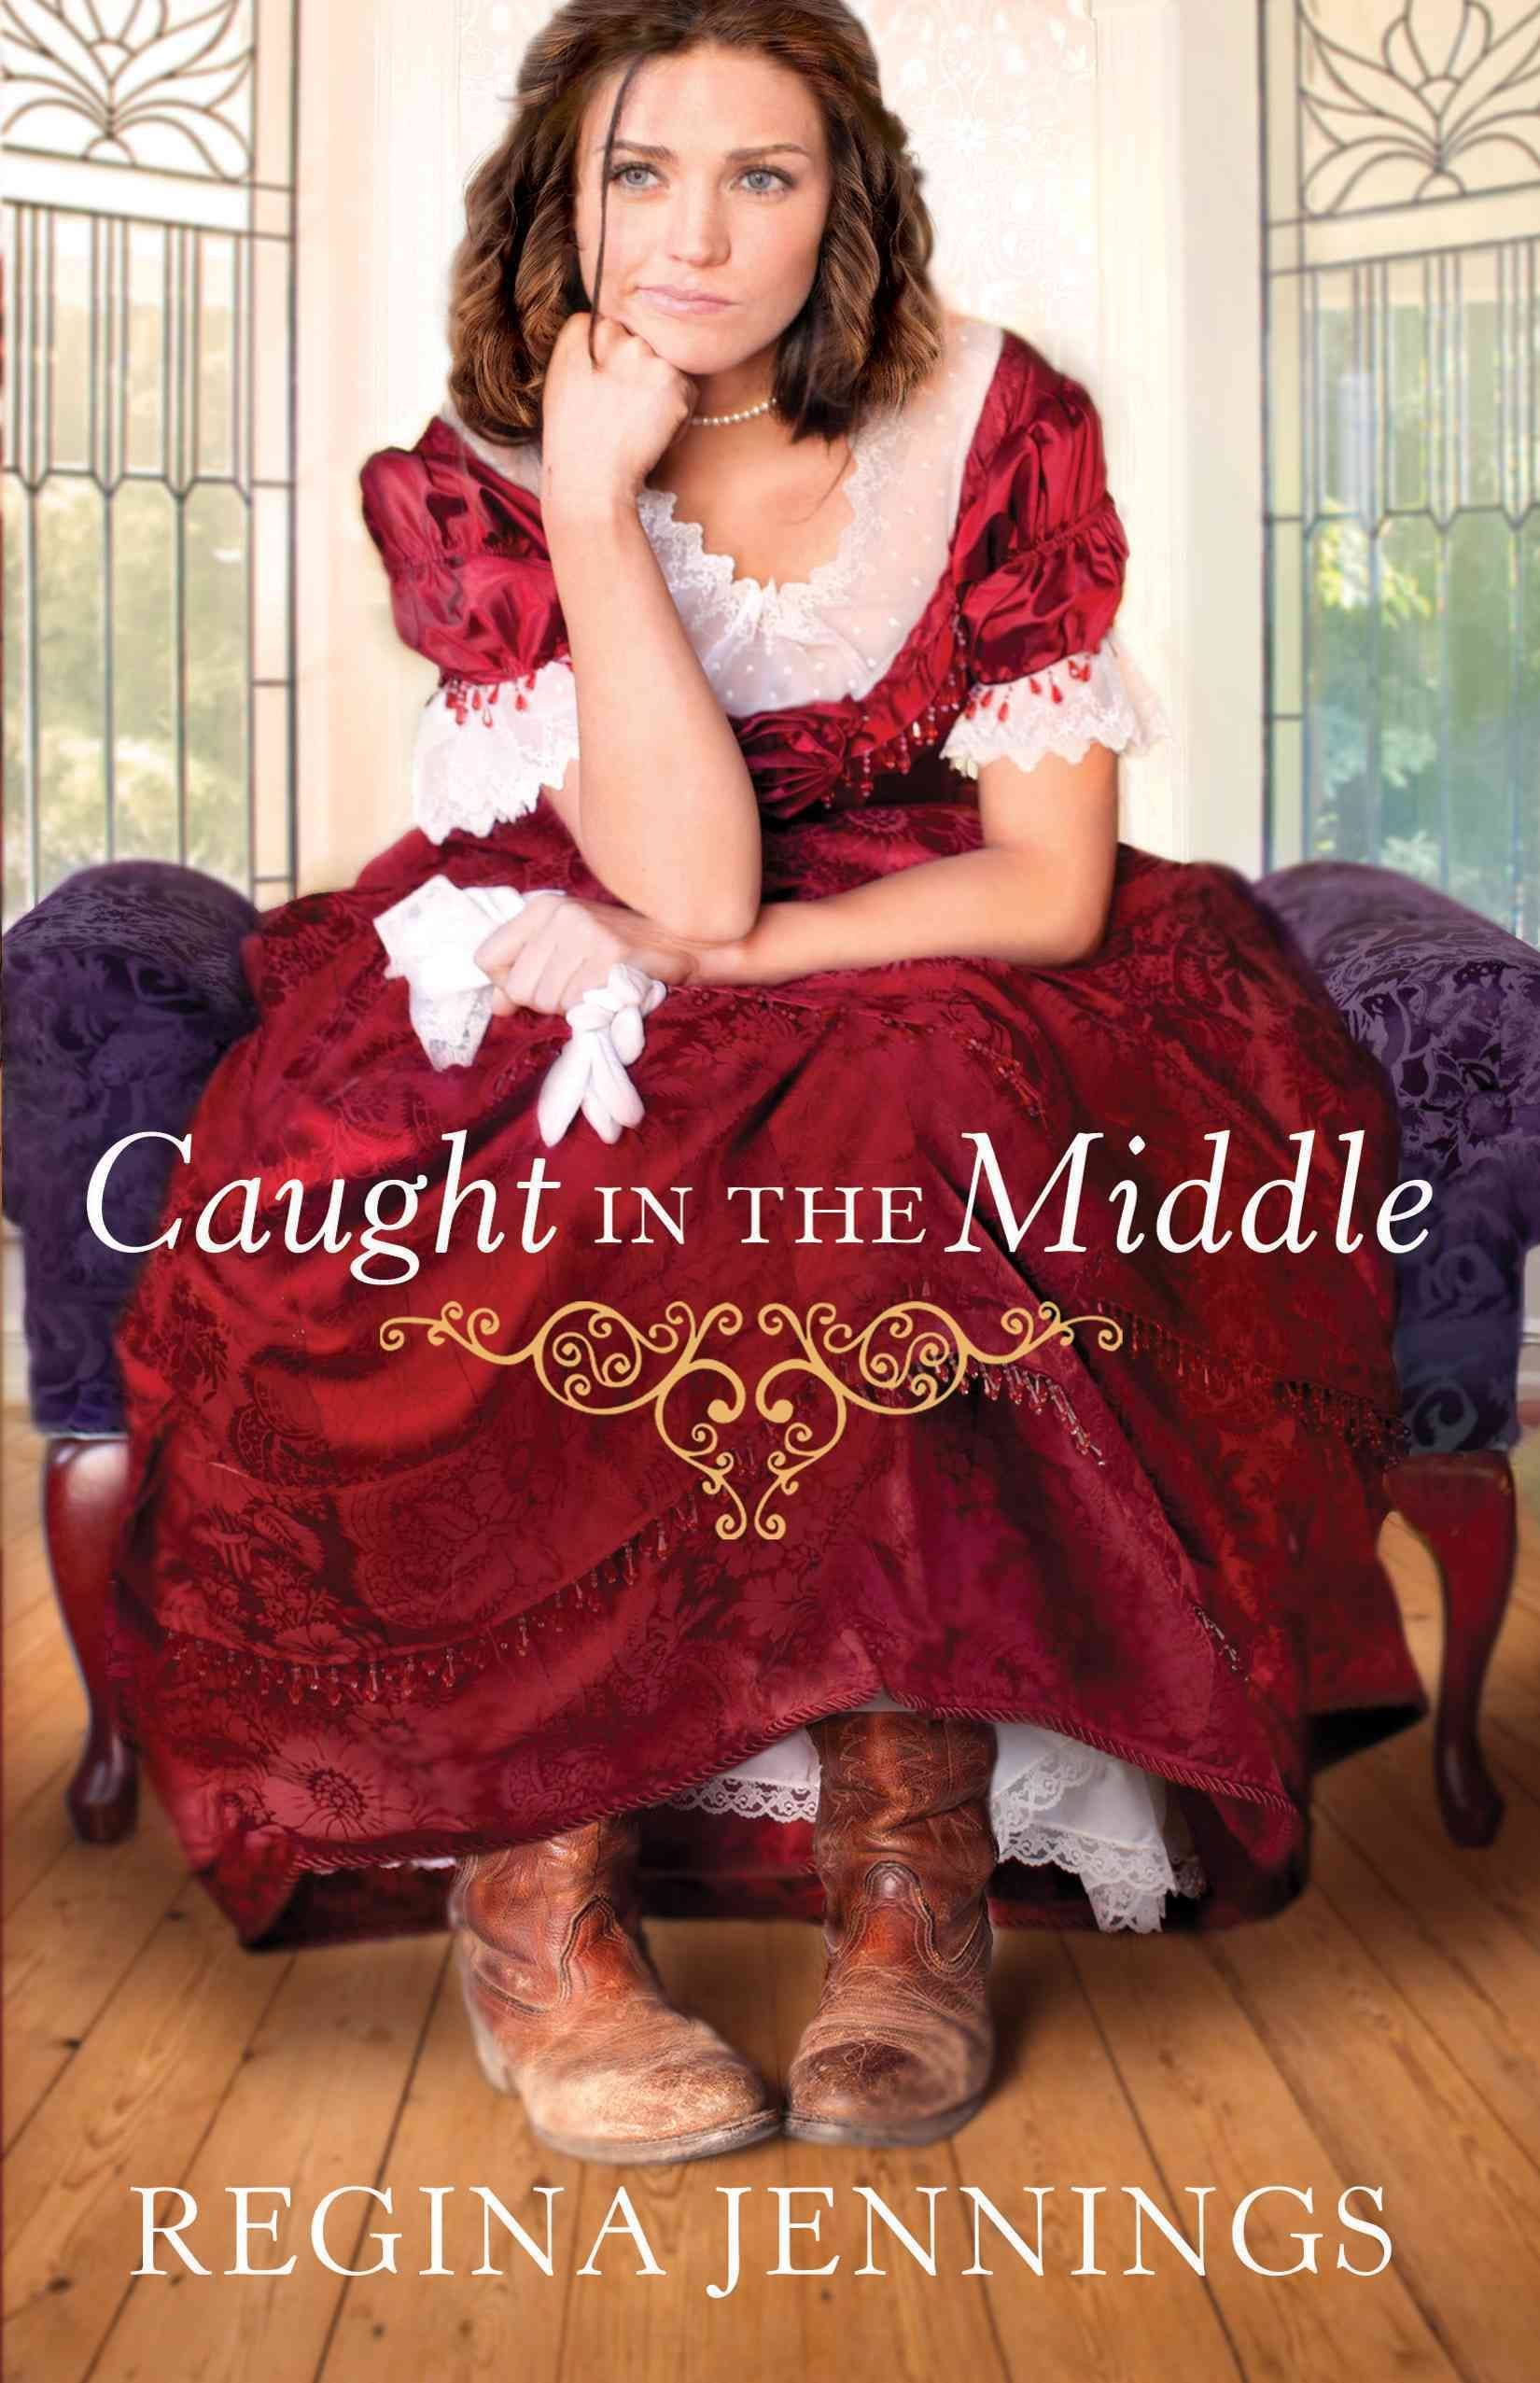 Caught in the Middle [Book]